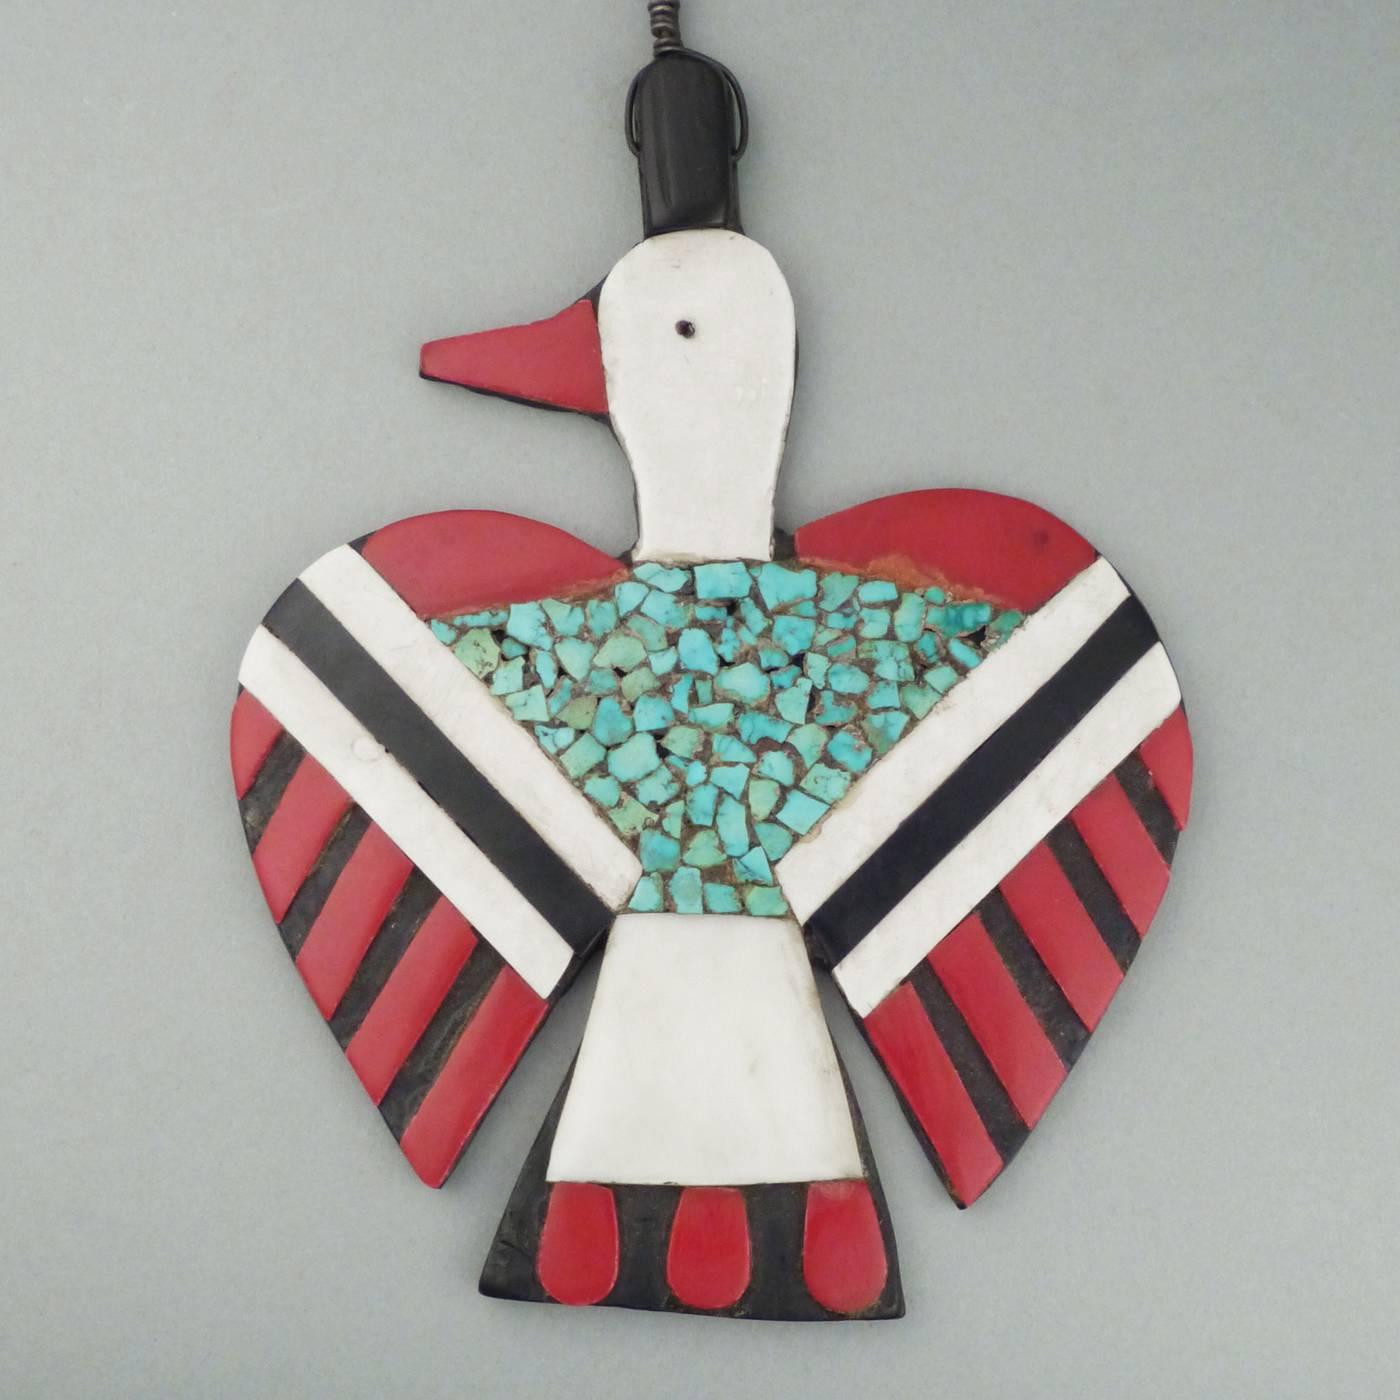 Beginning in the 1920s, the artists of Kewa (formerly known as Santo Domingo Pueblo) began making jewelry using a variety of found and recycled materials including turquoise chips, plastic, car battery casings and vinyl records.
This unusually